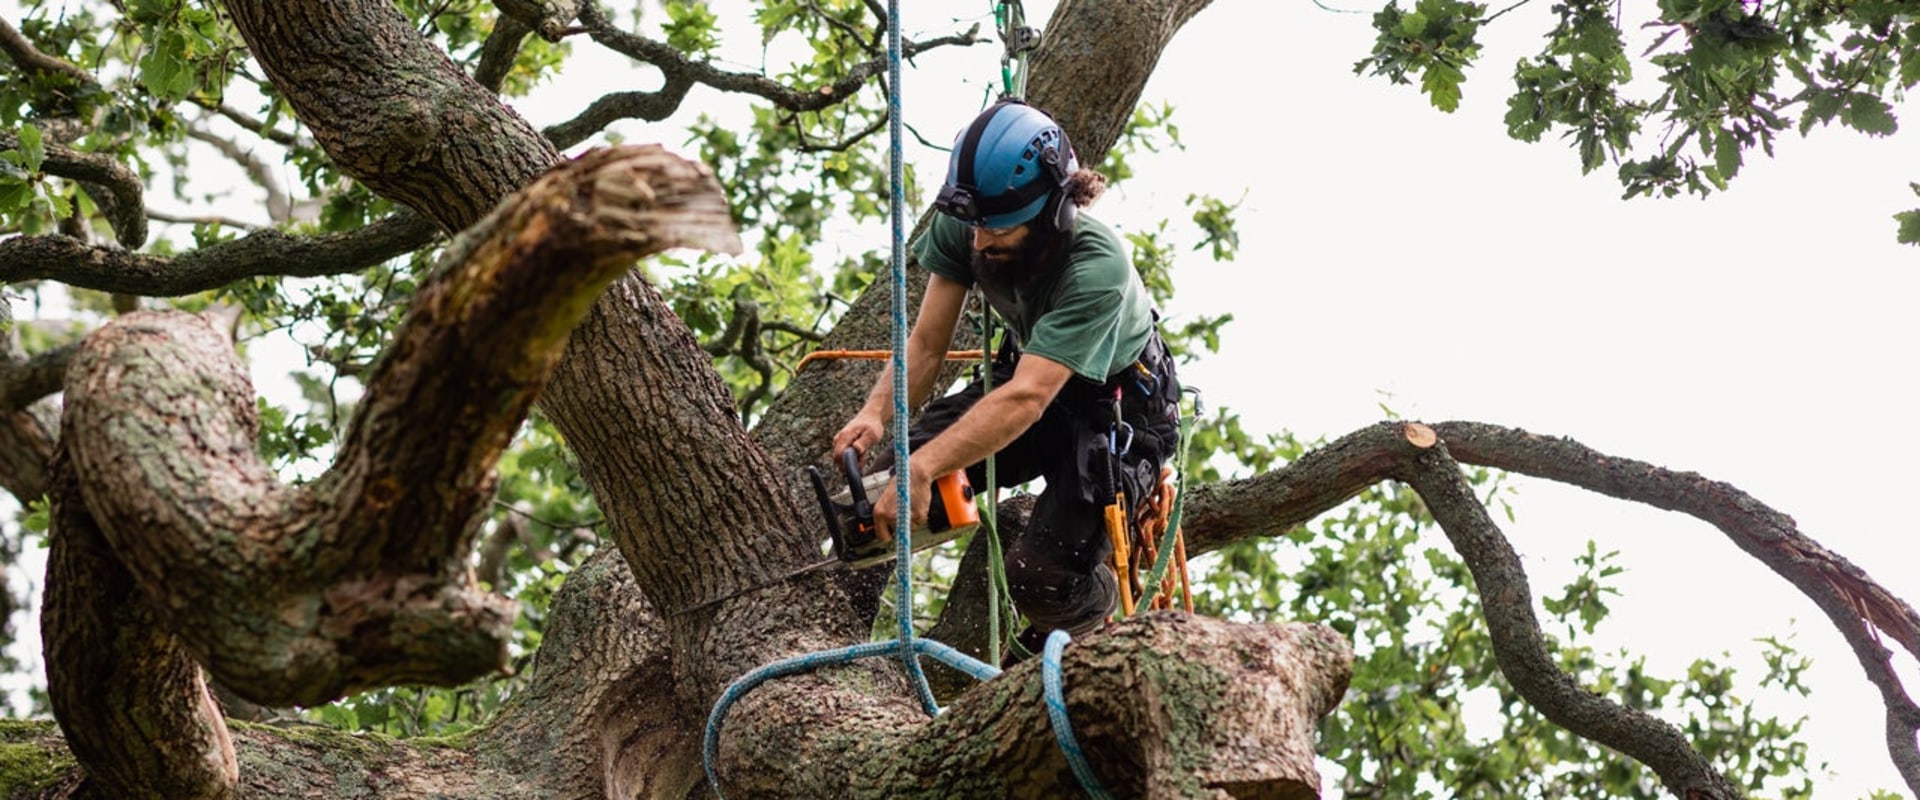 Will homeowners insurance cover cutting down a tree?